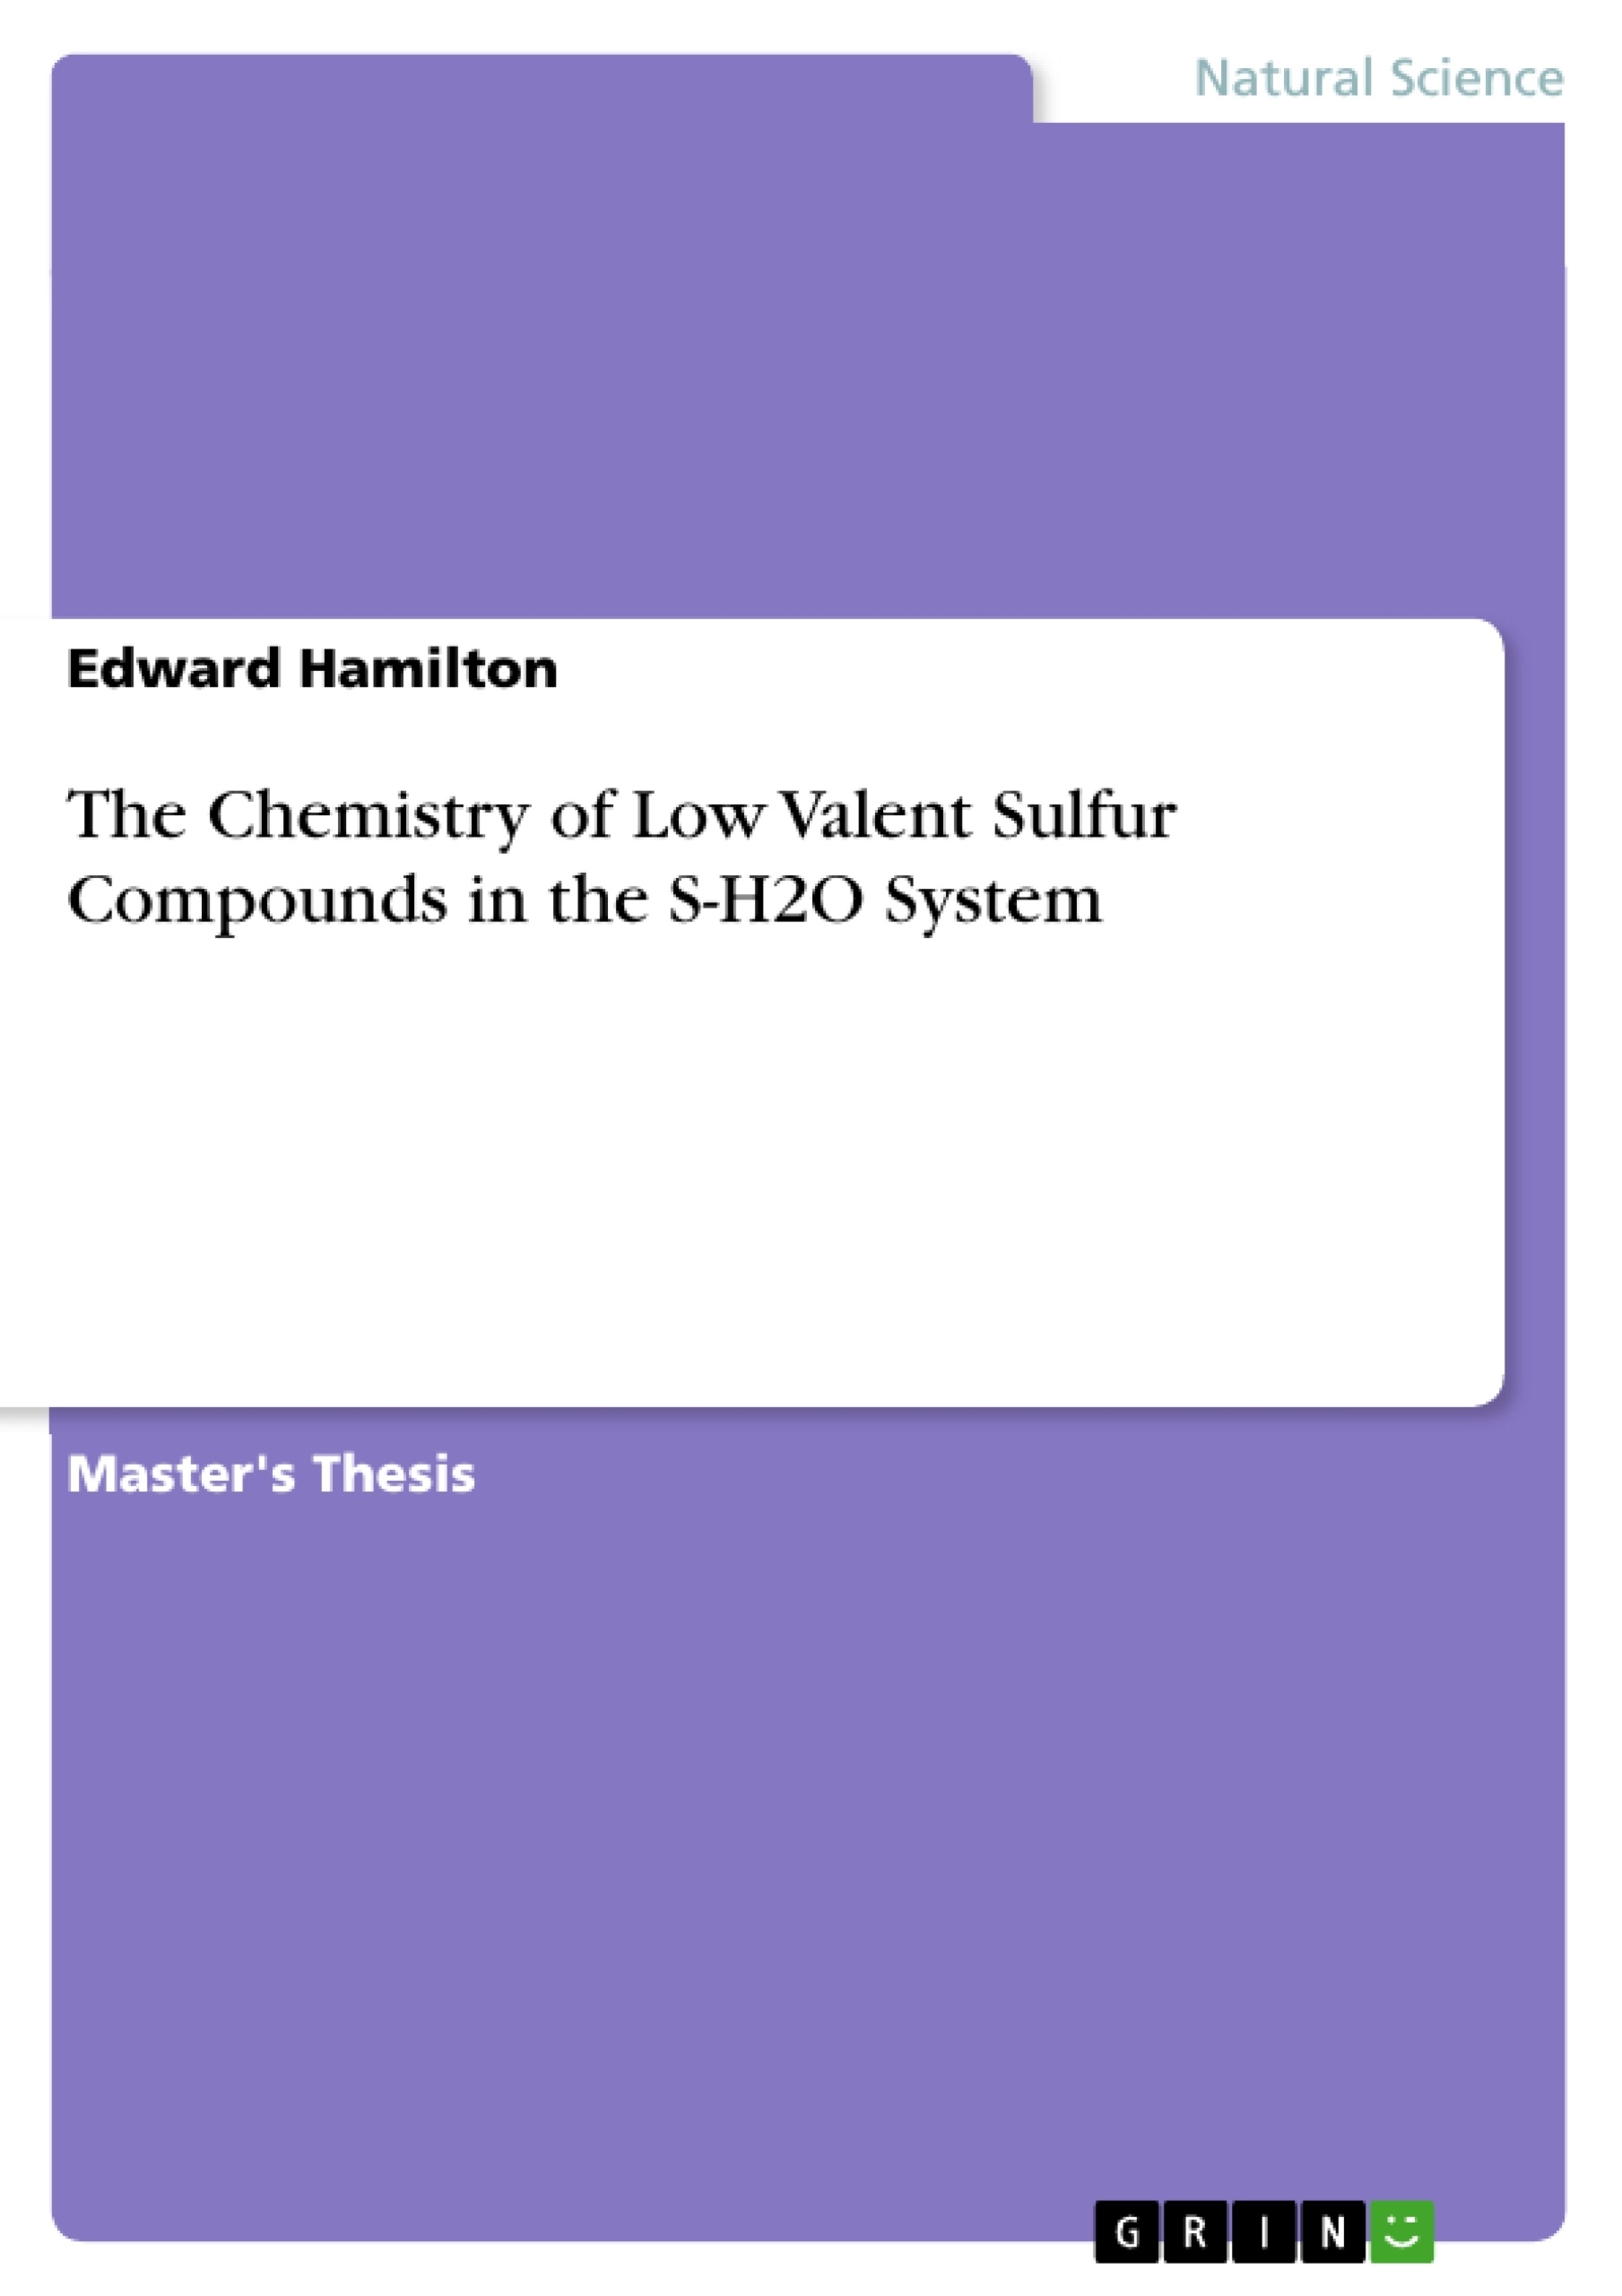 Title: The Chemistry of Low Valent Sulfur Compounds in the S-H2O System